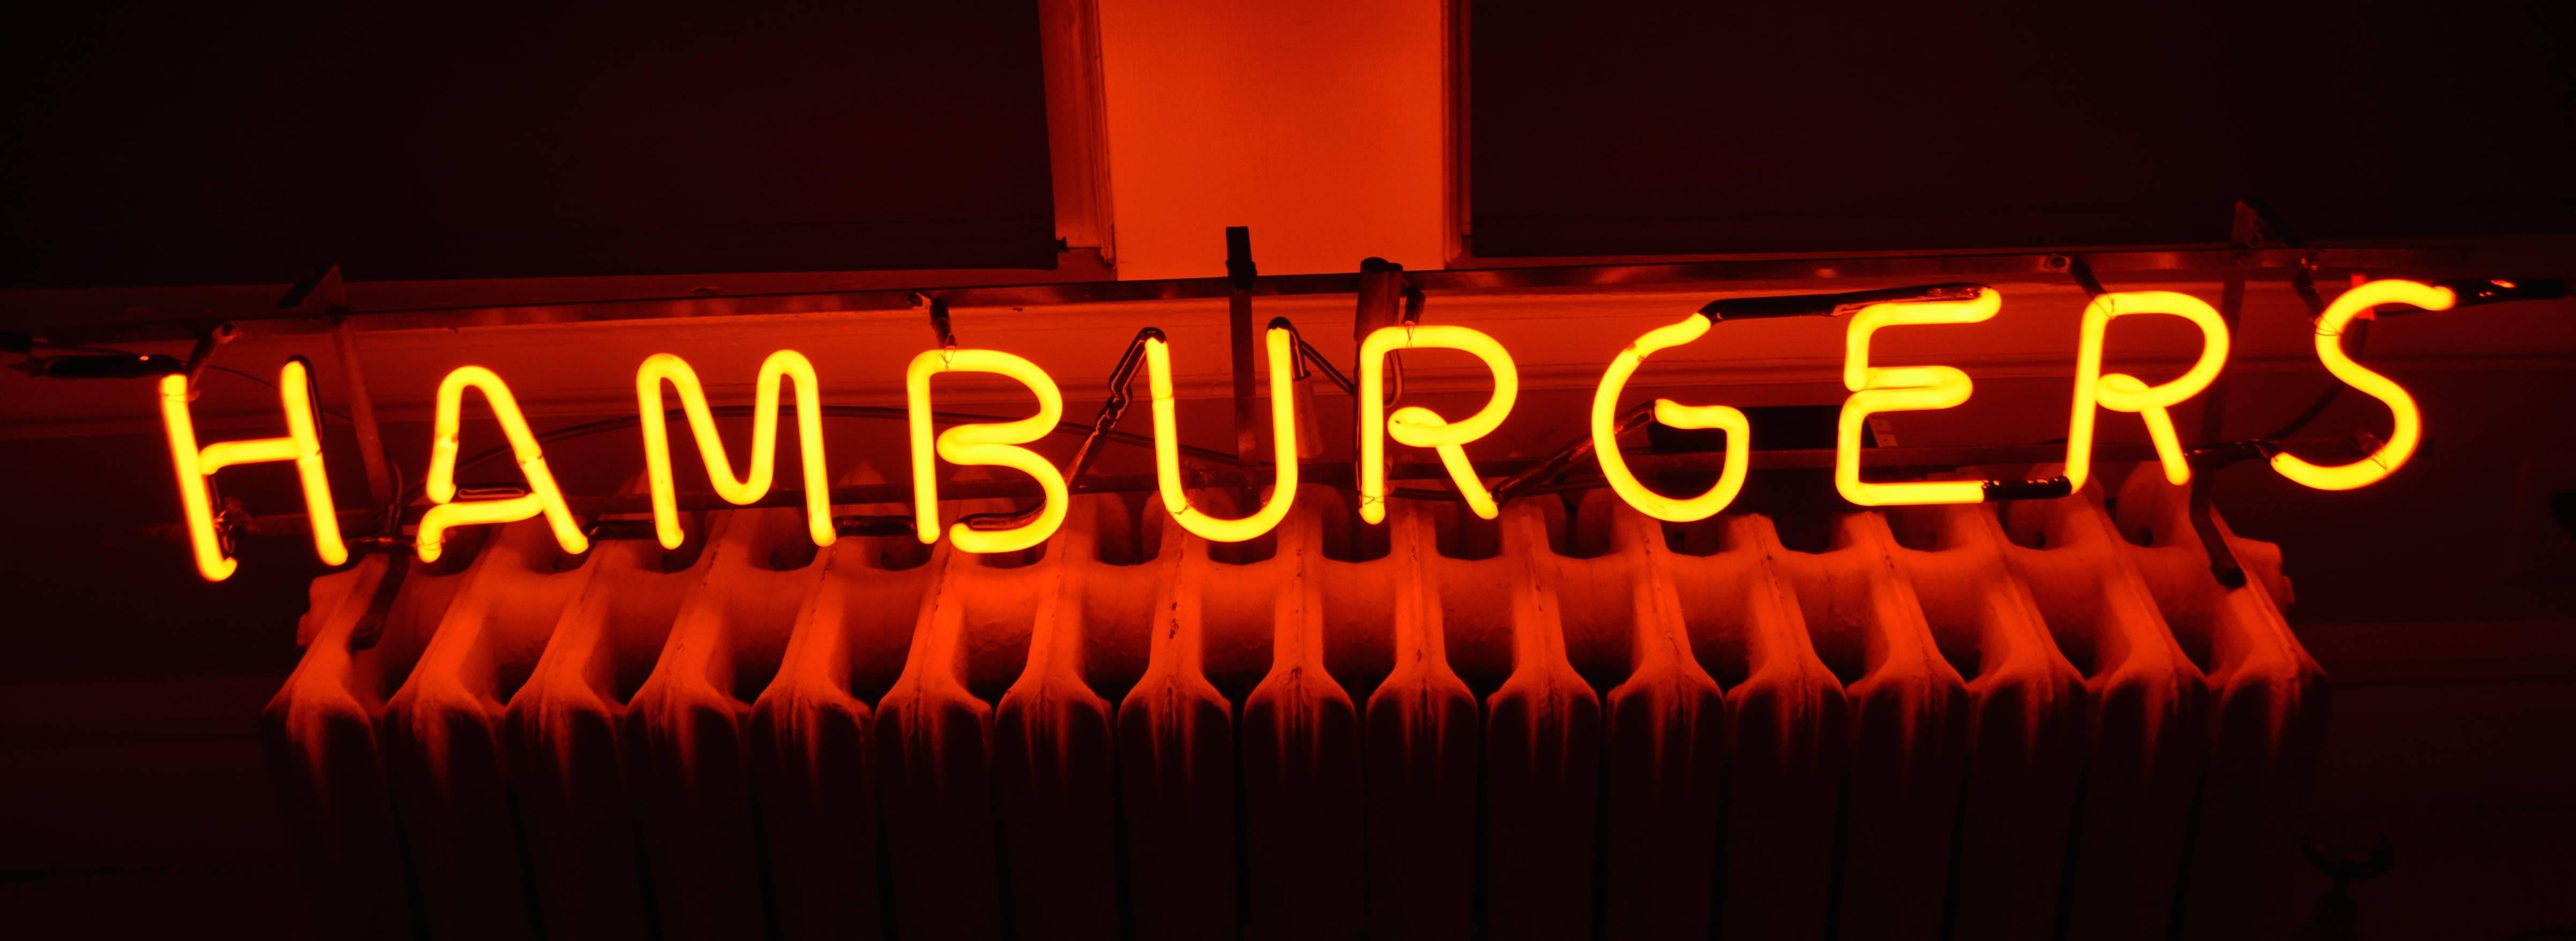 Mid-Century Modern Neon Sign from Classic, 1940s Midwestern Diner Hamburgers